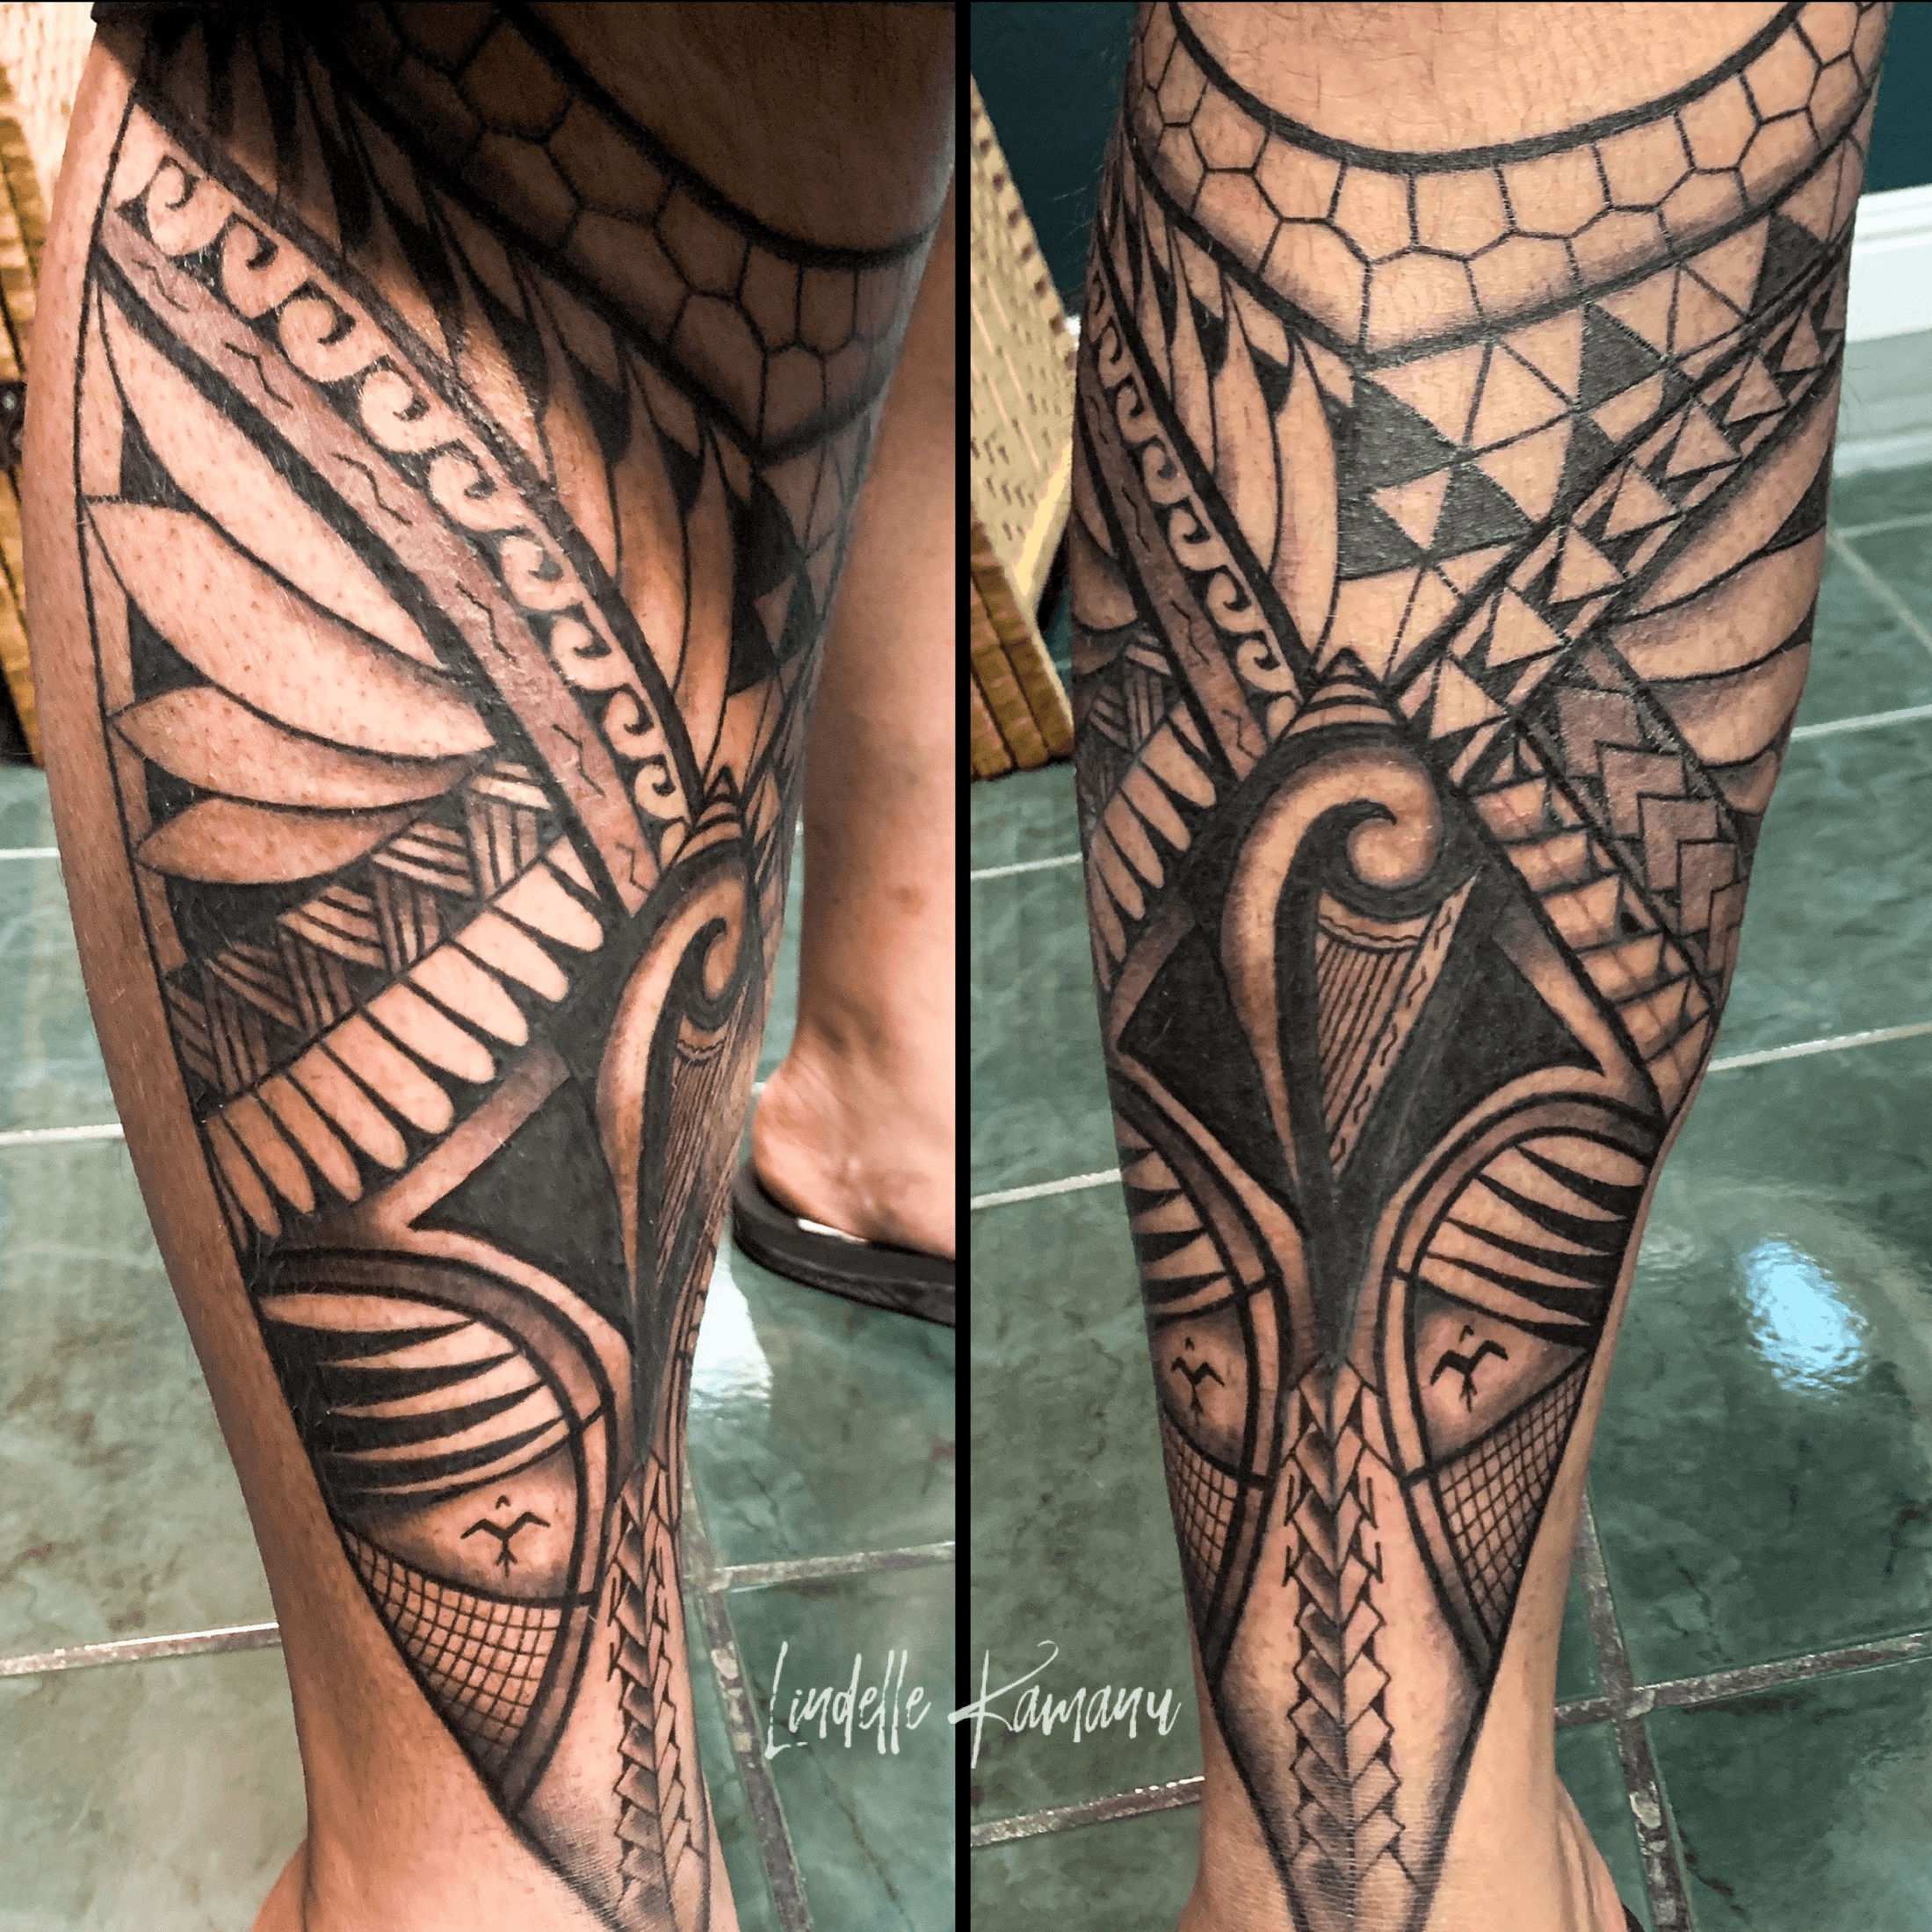 Tattoo uploaded by Lindelle • Freehand Polynesian Tribal Full